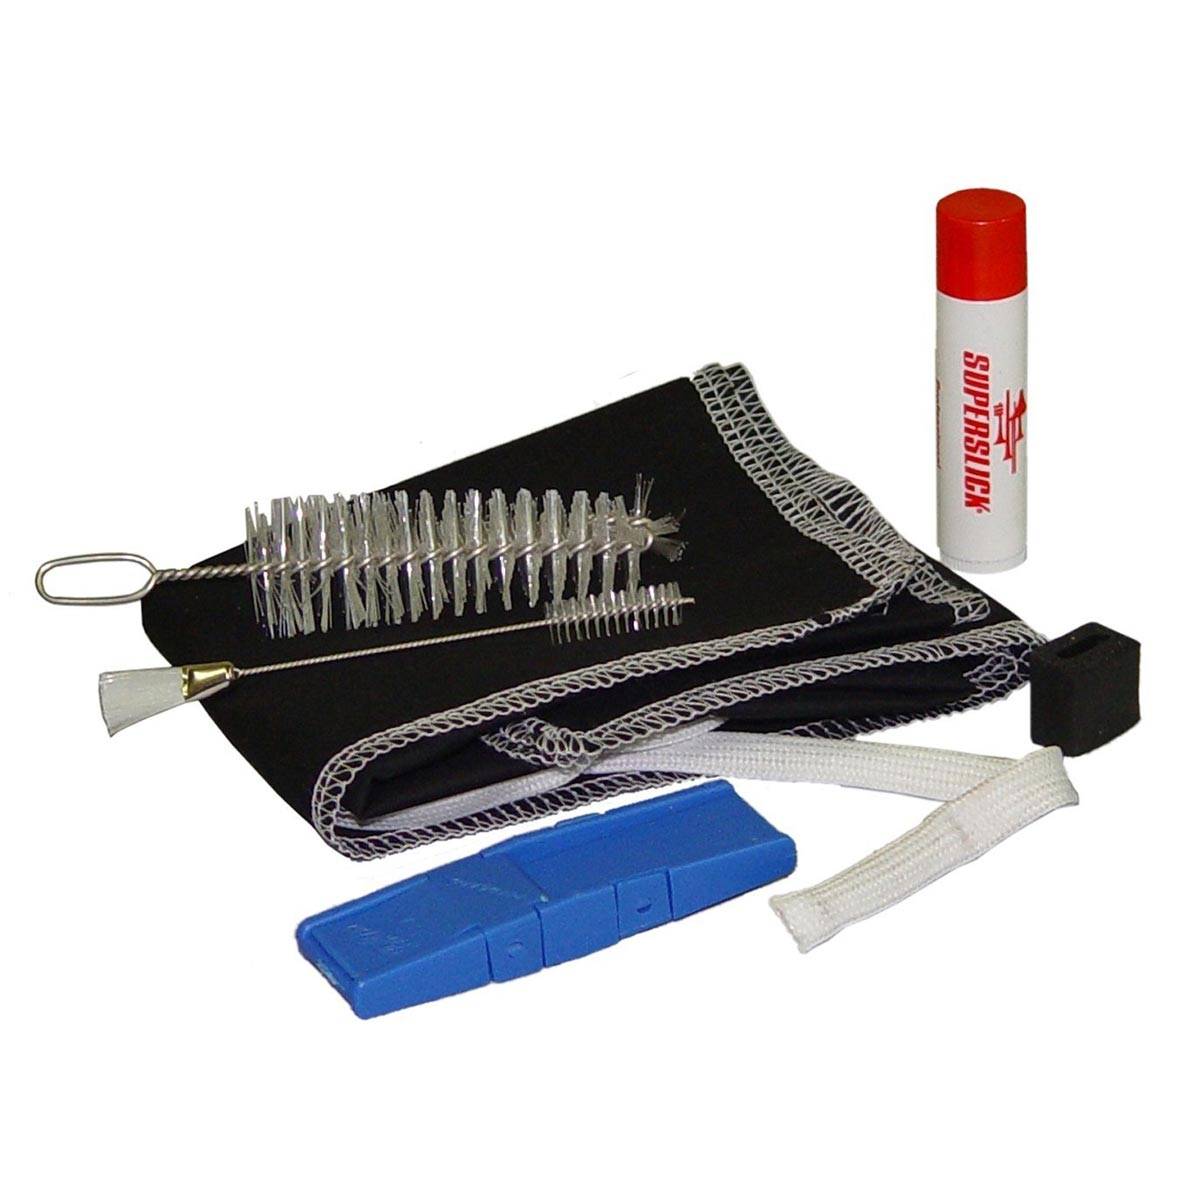 Superslick CCK Clarinet Cleaning Set